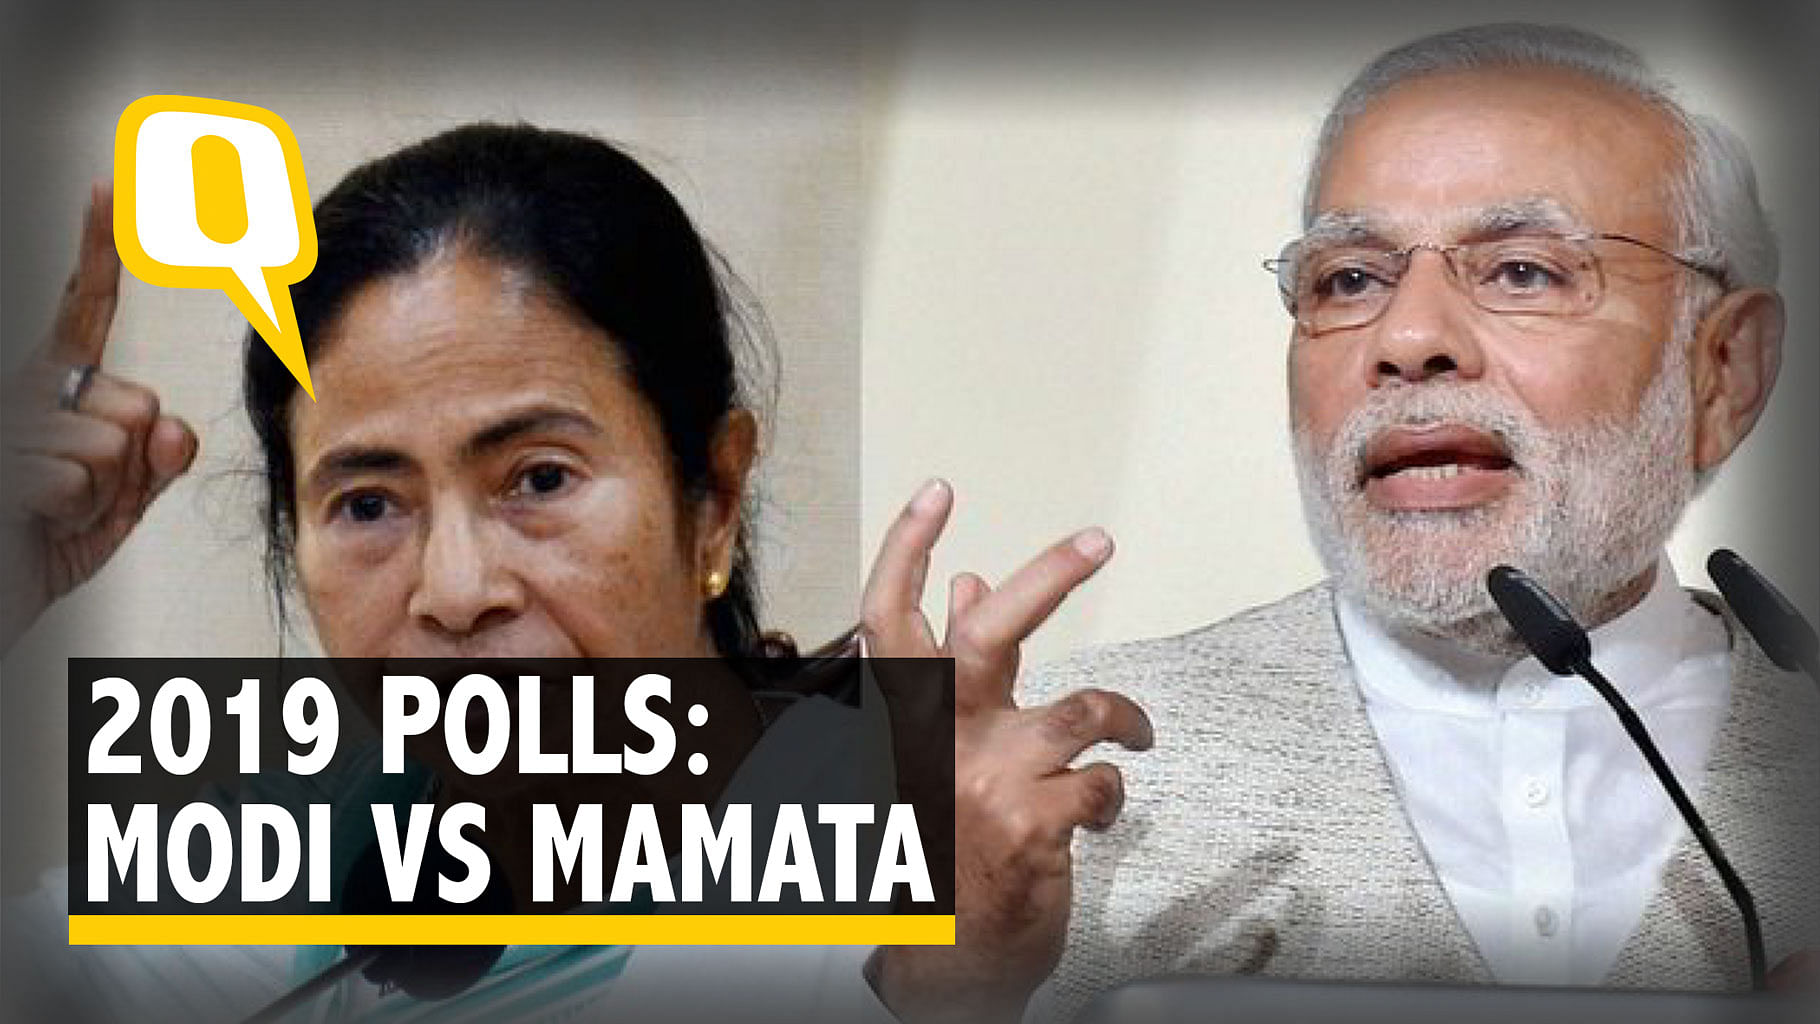 Does West Bengal Chief Minister Mamata Banerjee stand in the way of Modi and a majority in the elections?